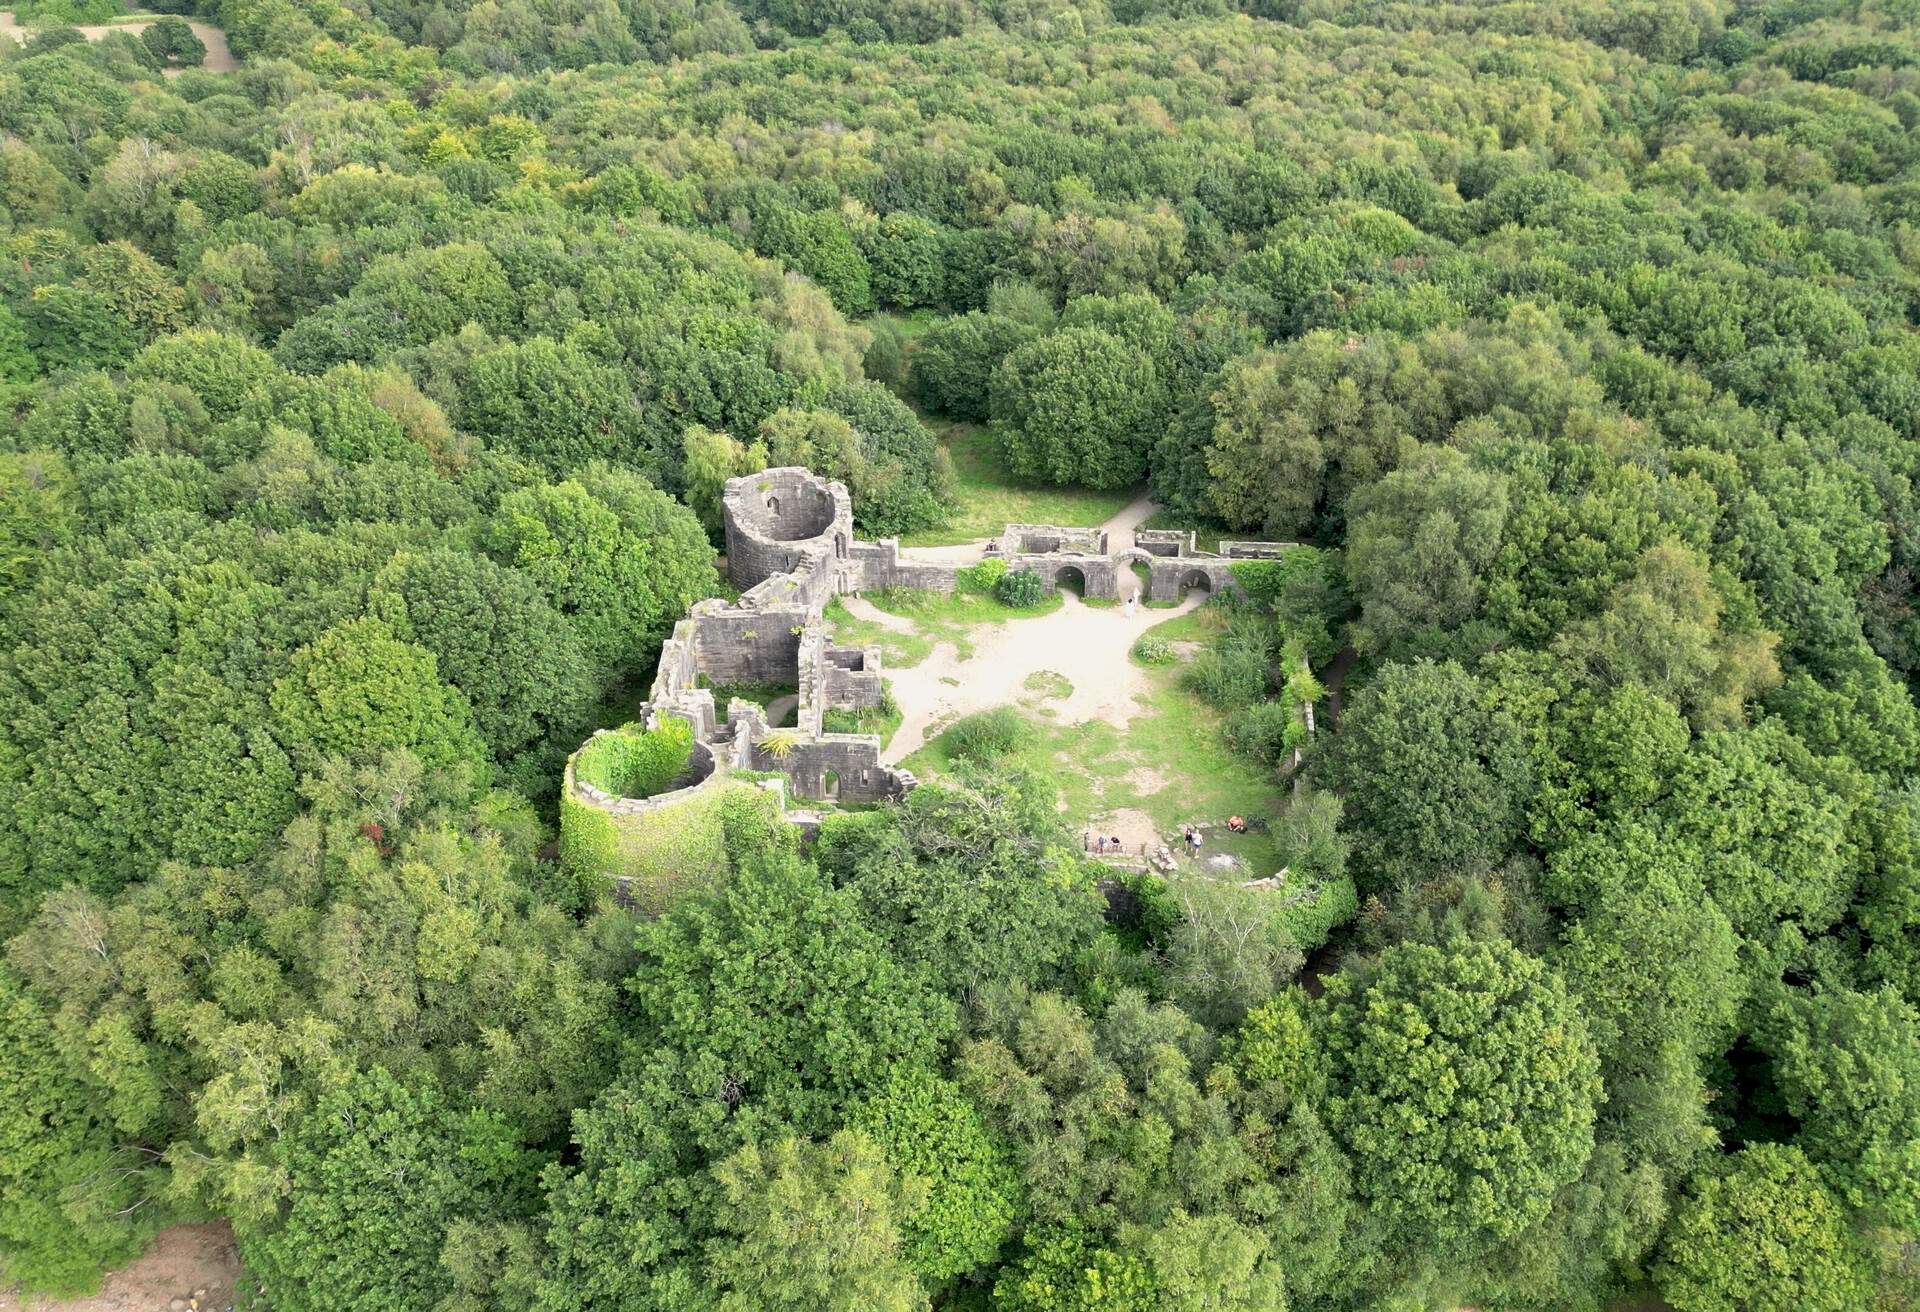 Beautiful ruins of a castle in the middle of a green forest